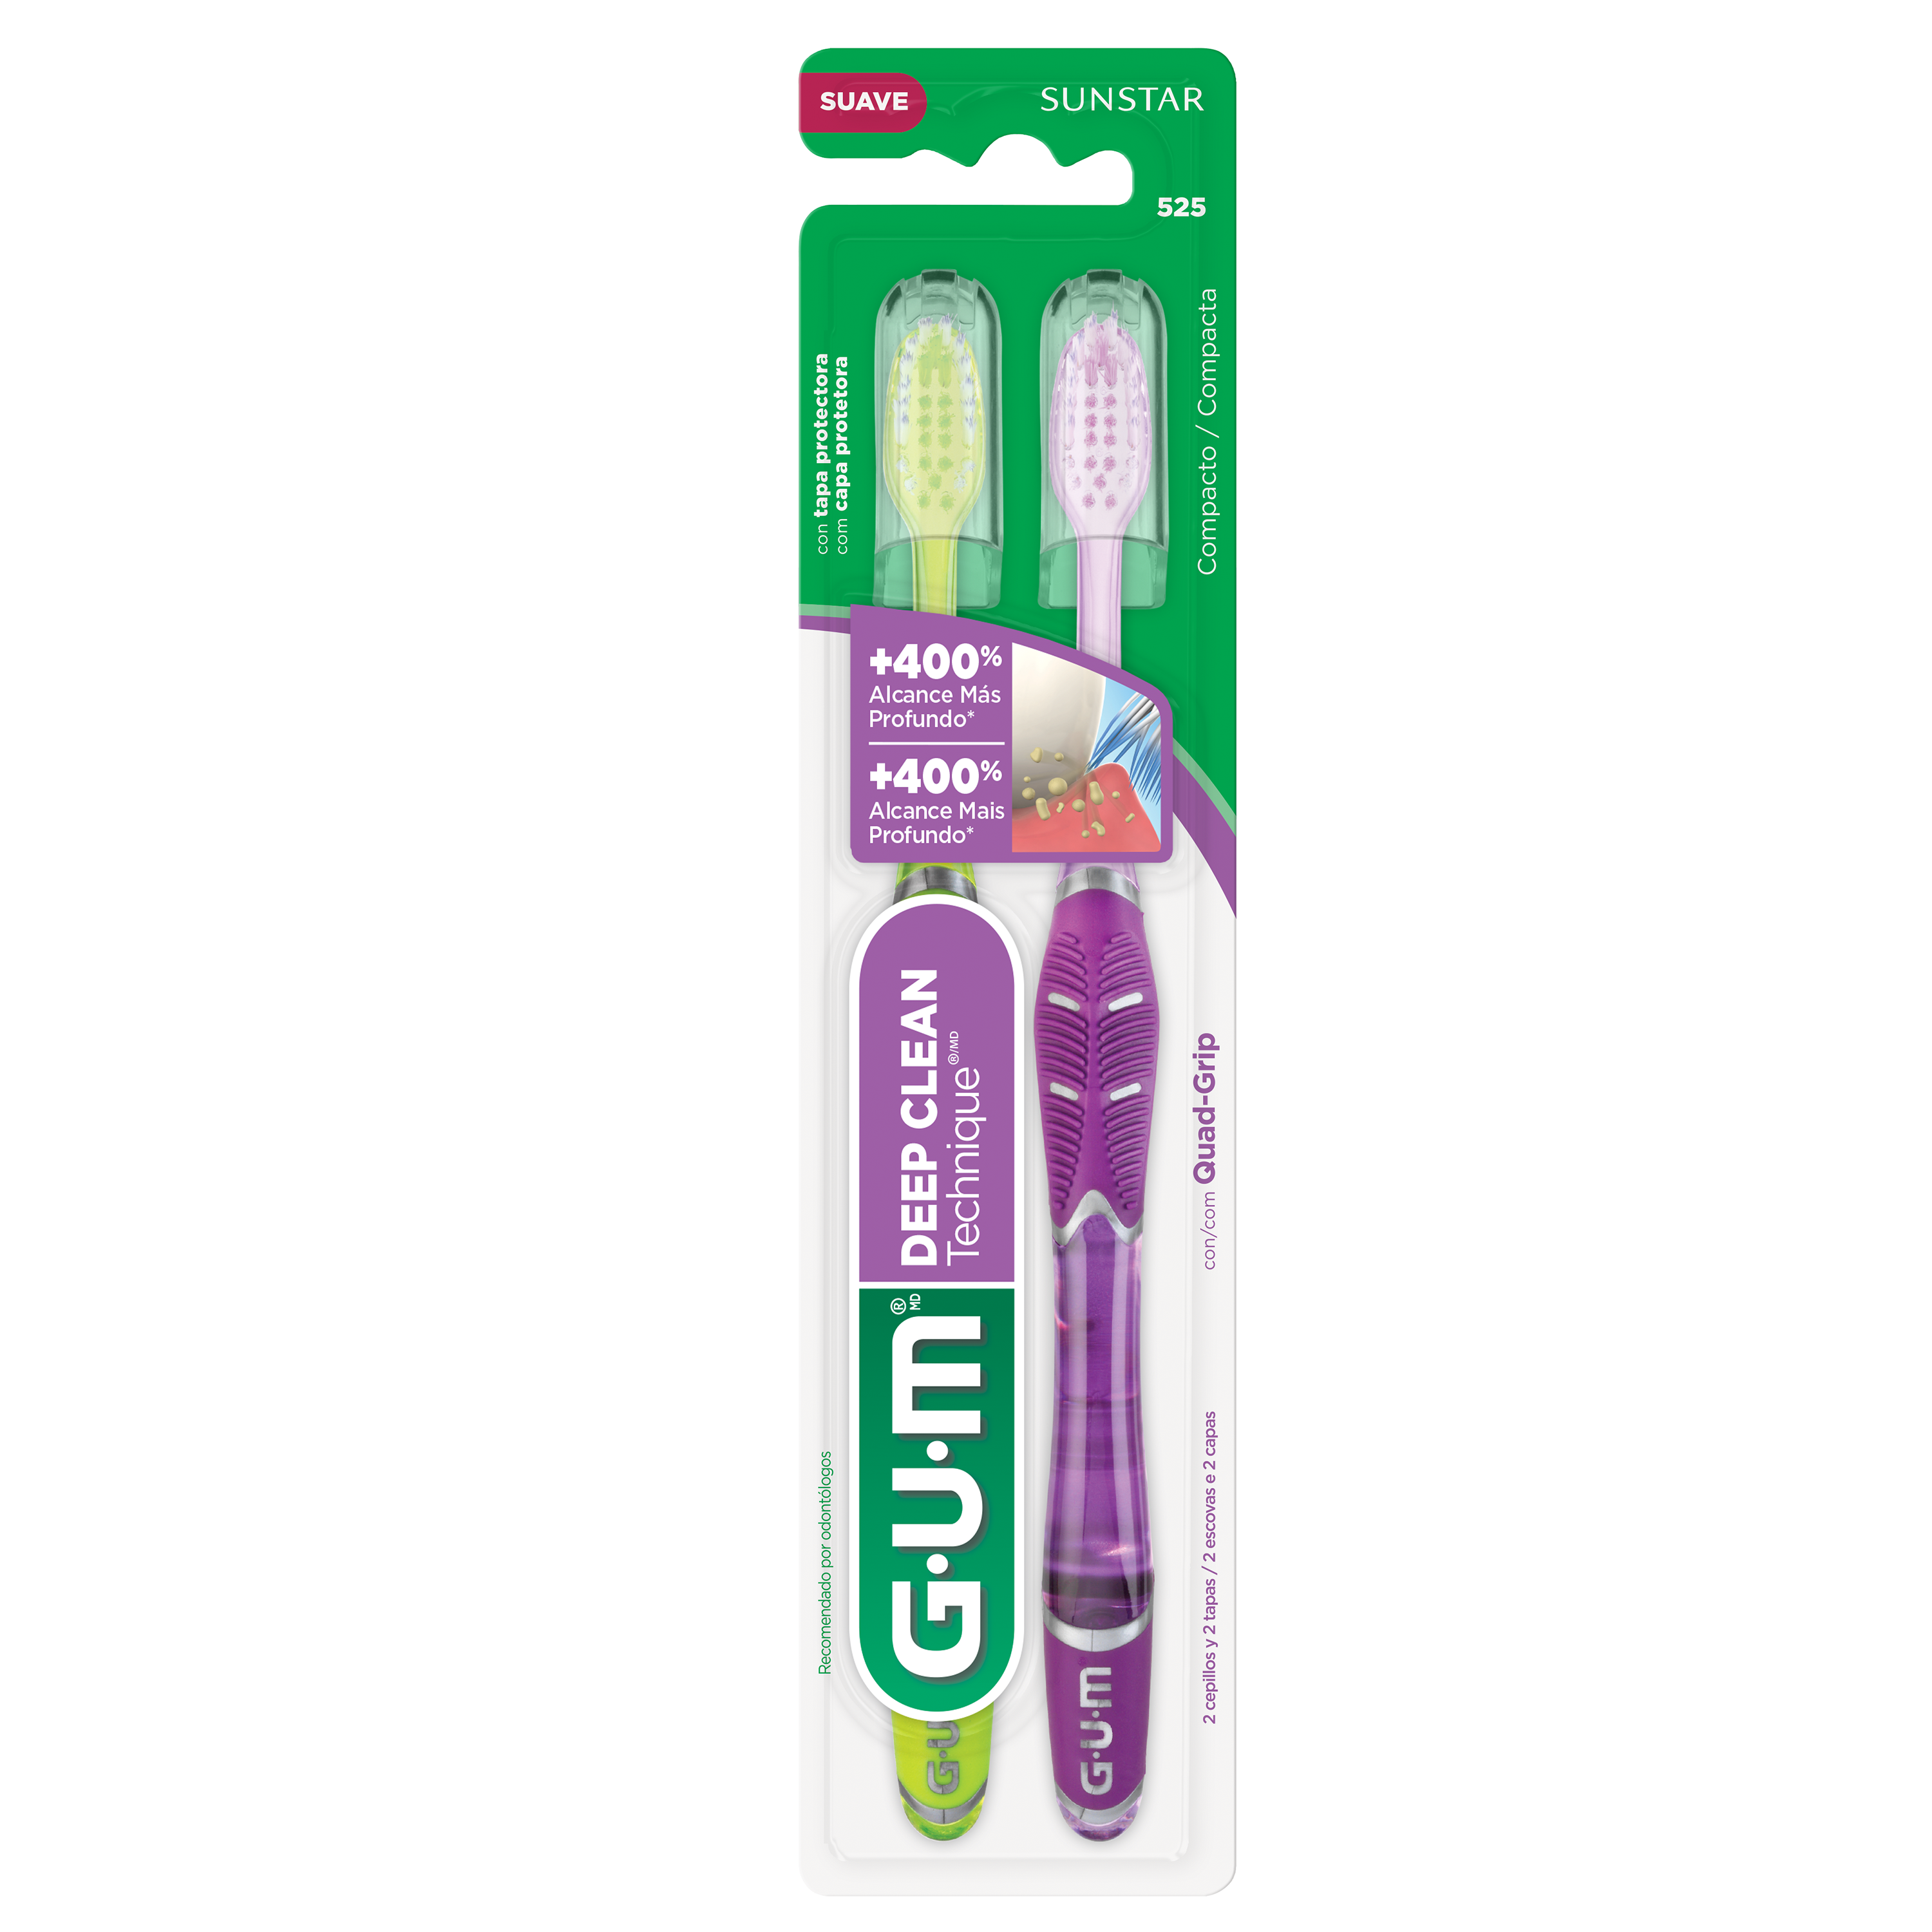 525LY2-Product-Packaging-Toothbrush-Technique-DeepClean-front1-2ct.png